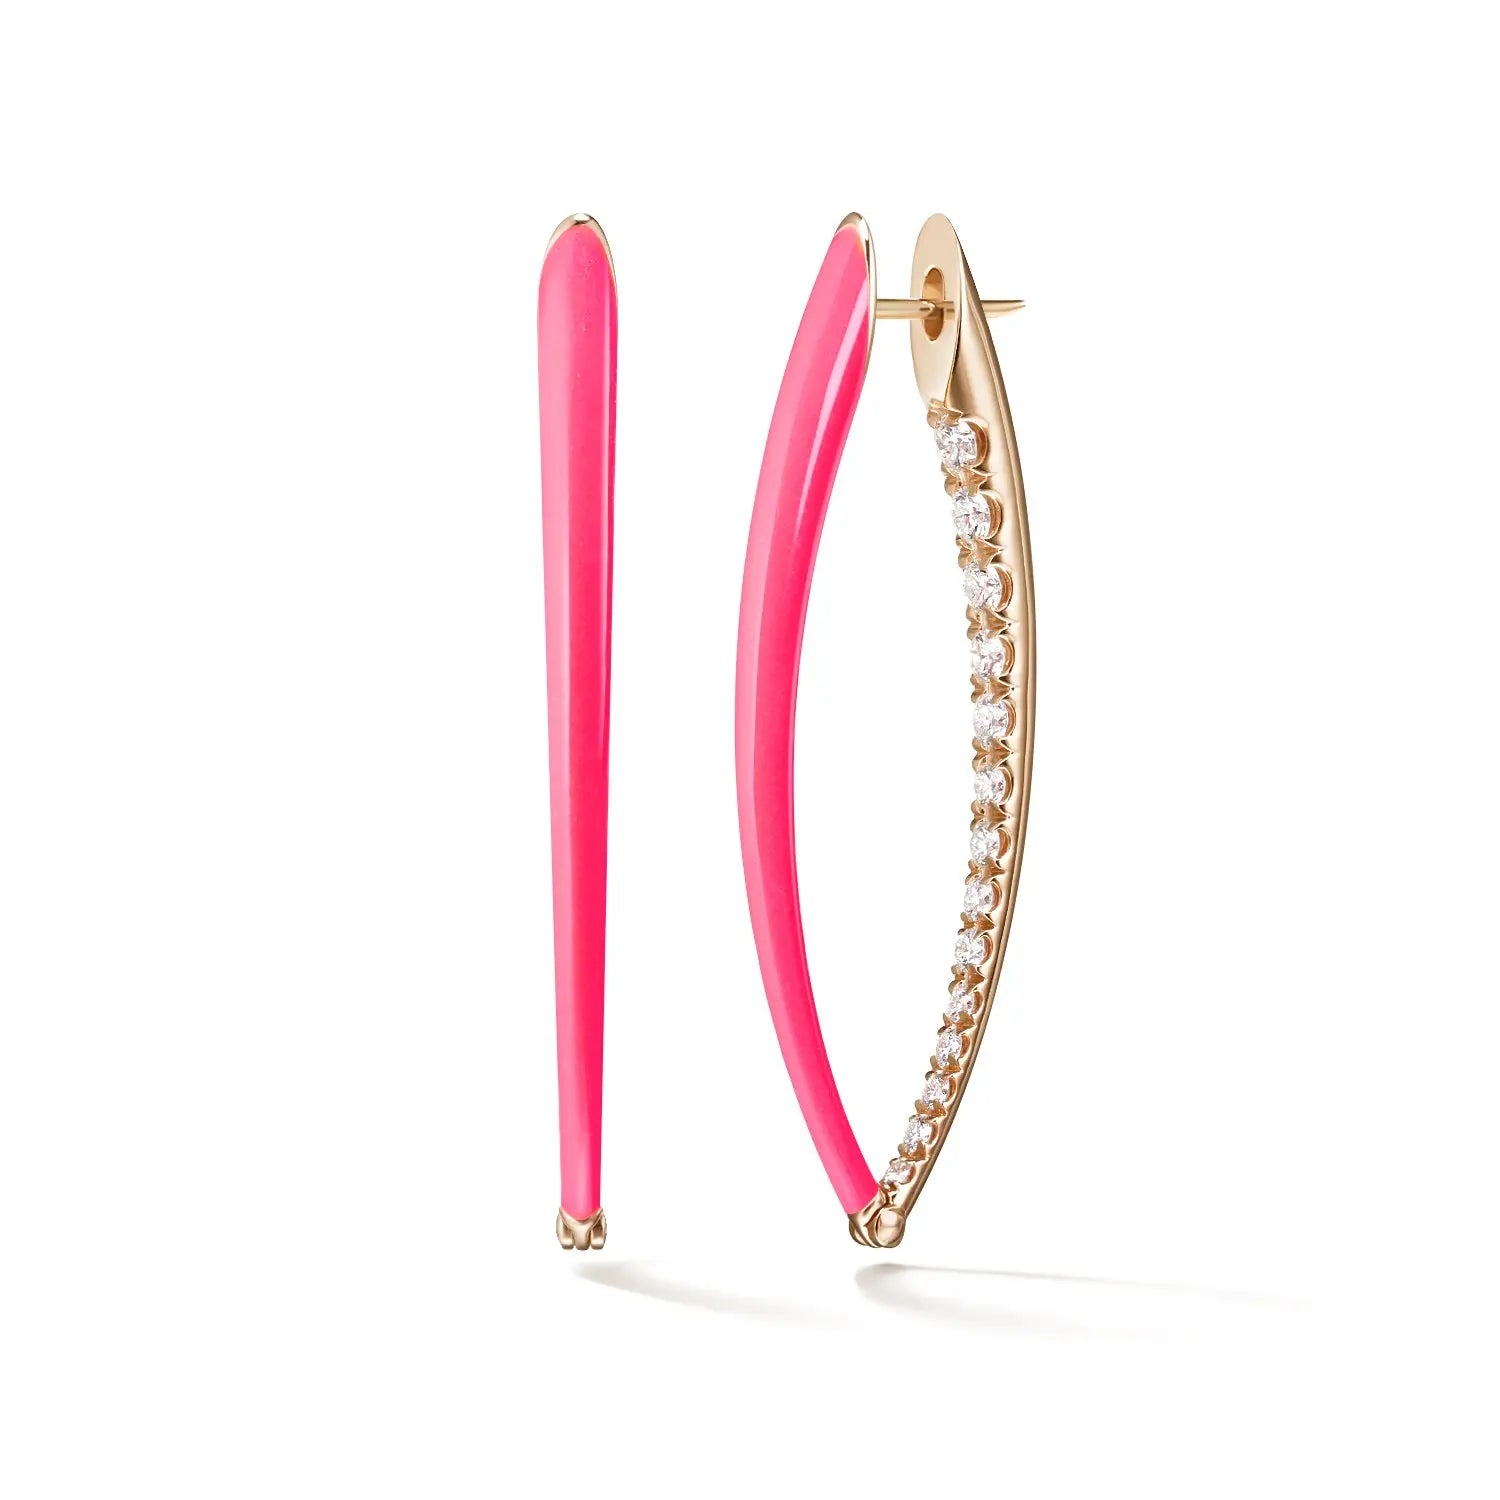 18k gold earrings with diamonds and pink enamel  Hinged hoop with post back  42mm length  Approx. 0.92cts white diamonds  Designed by Melissa Kaye